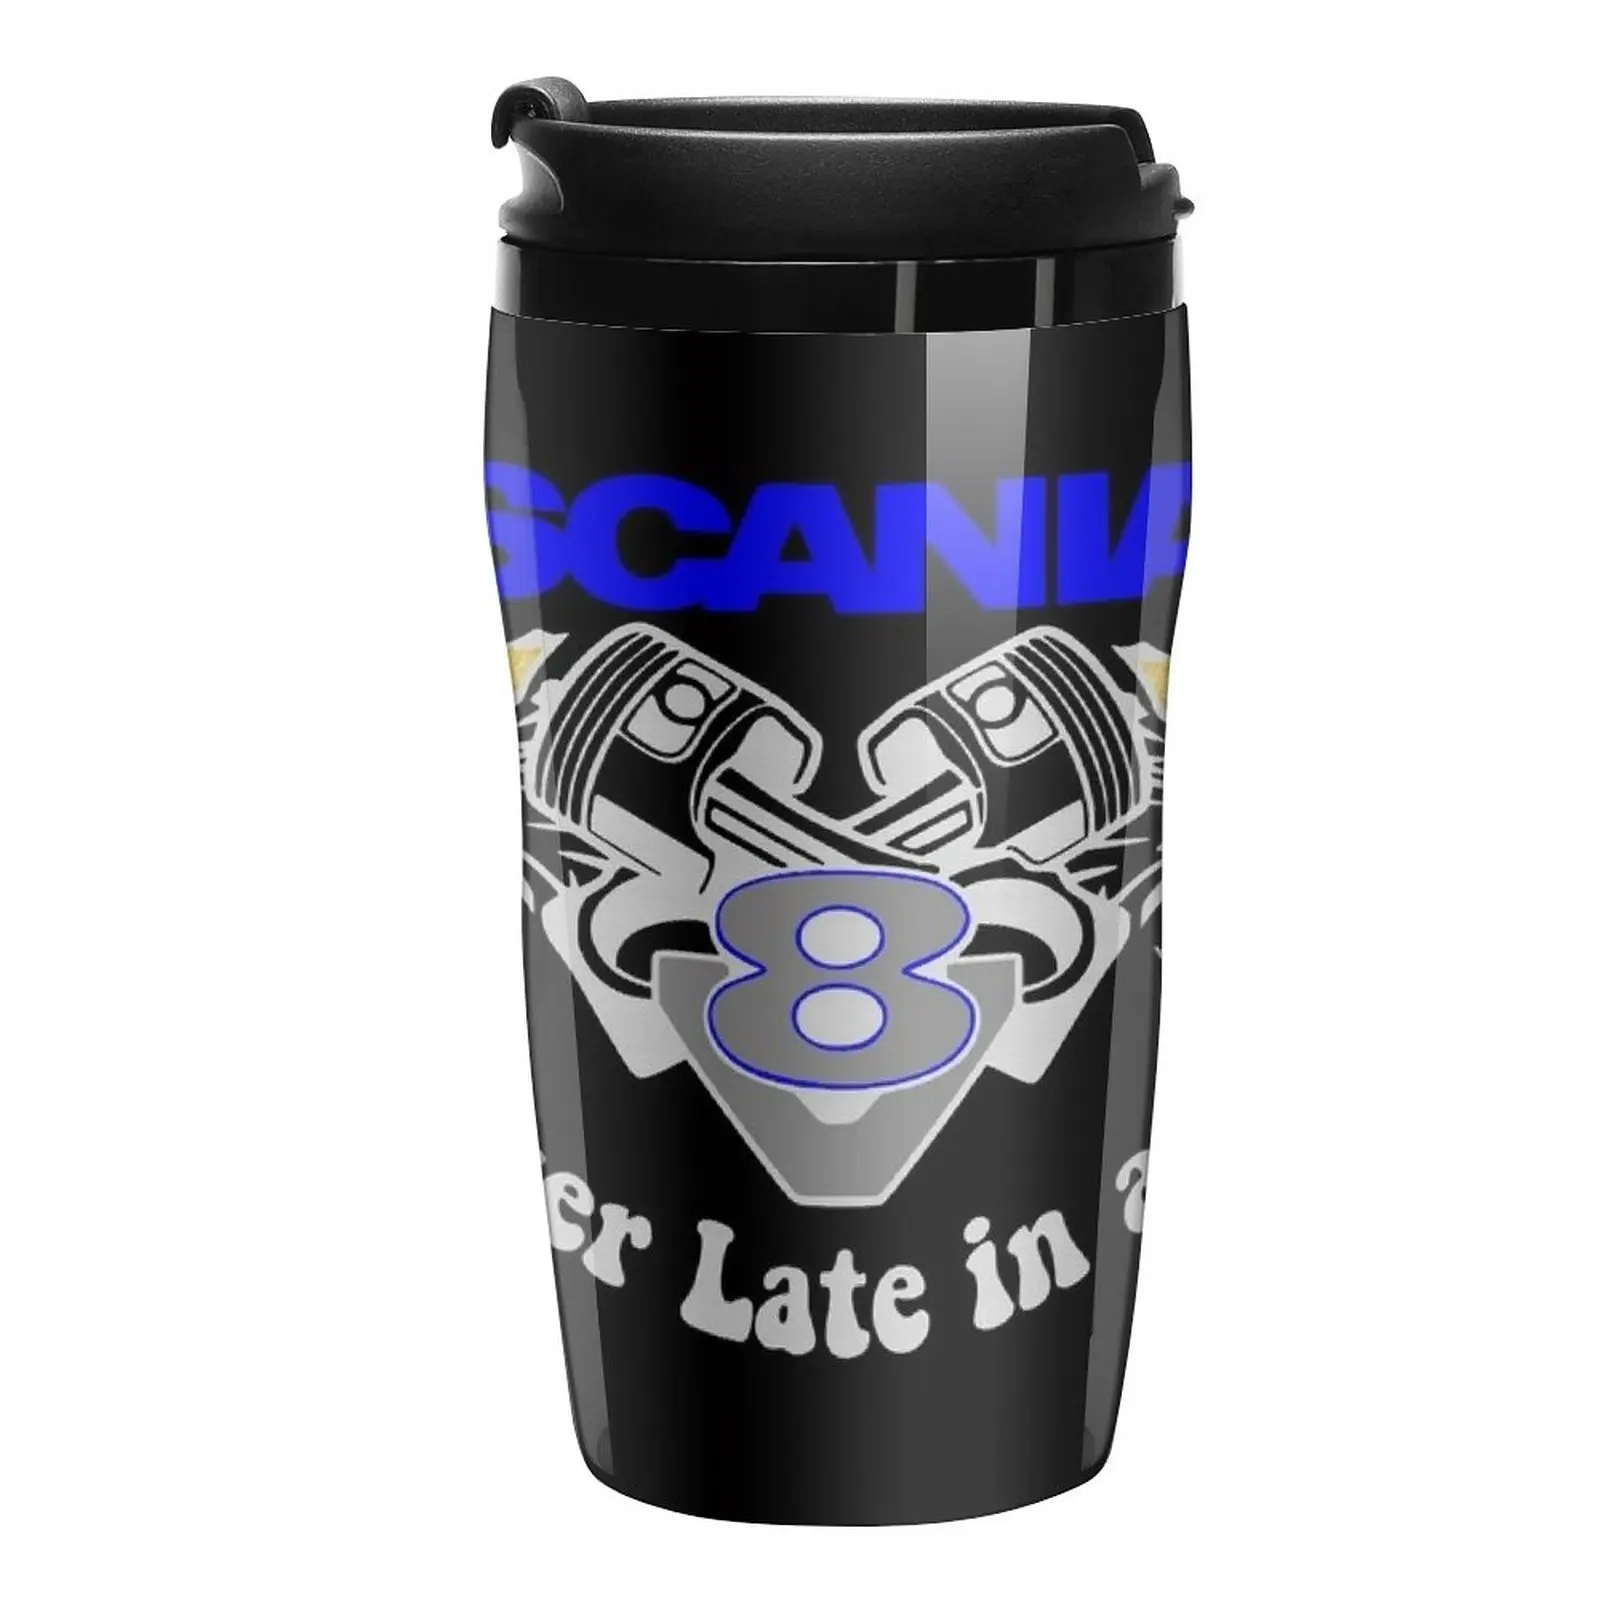 

New Never Late in a V8 Silver Travel Coffee Mug Cups For Coffee Coffee Cup Sets Coffee To Go